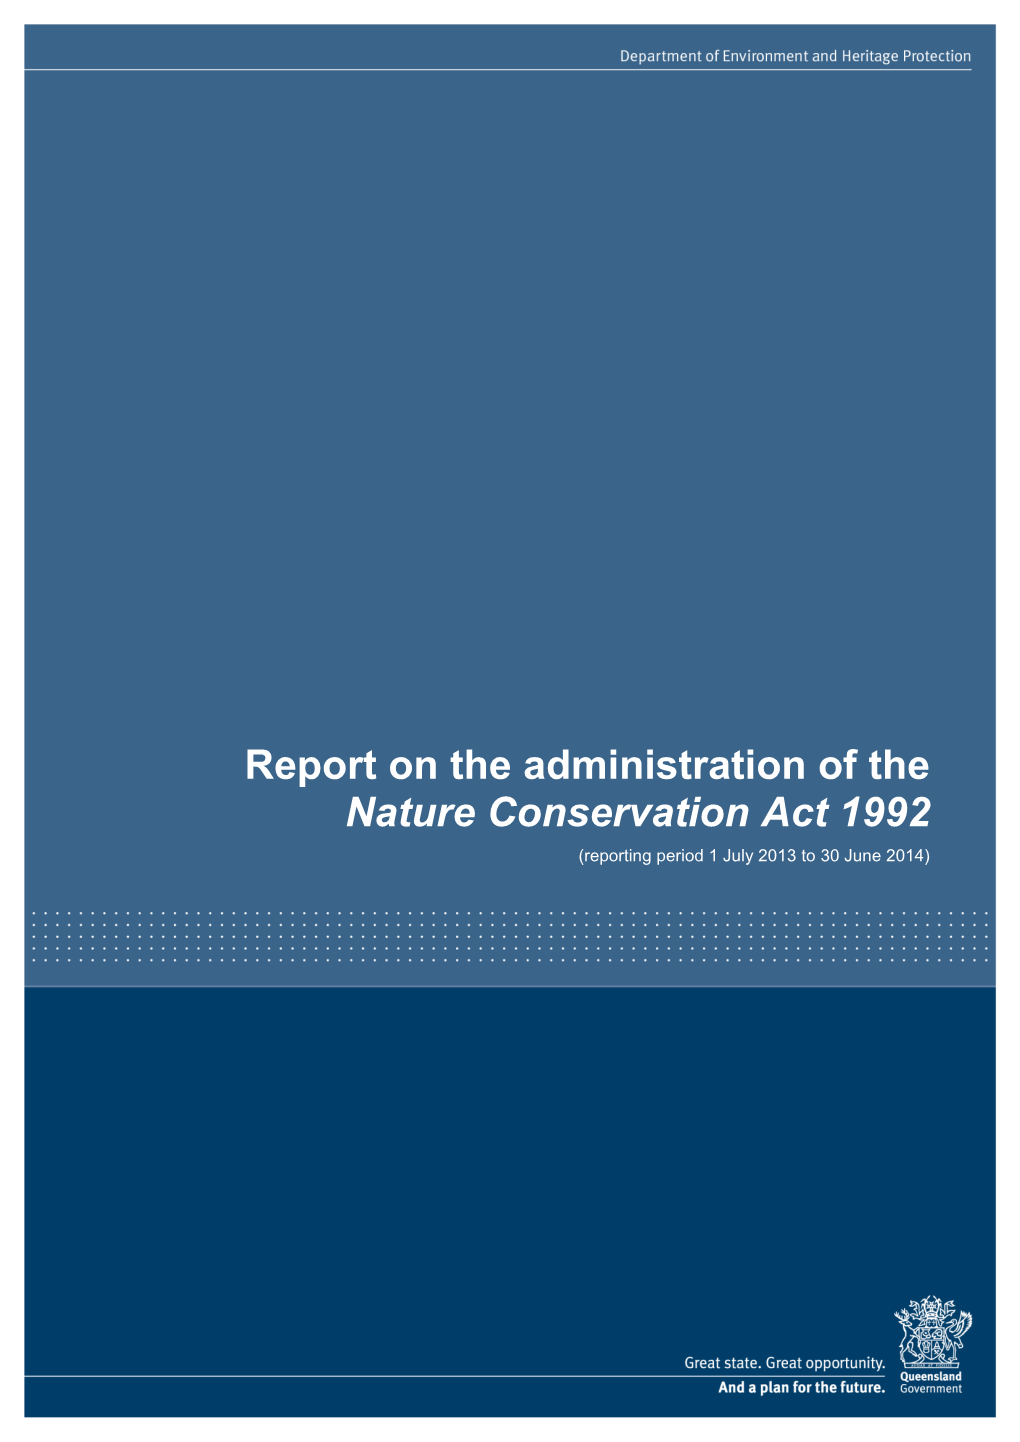 Report on the Administration of the Nature Conservation Act 1992 (Reporting Period 1 July 2013 to 30 June 2014)